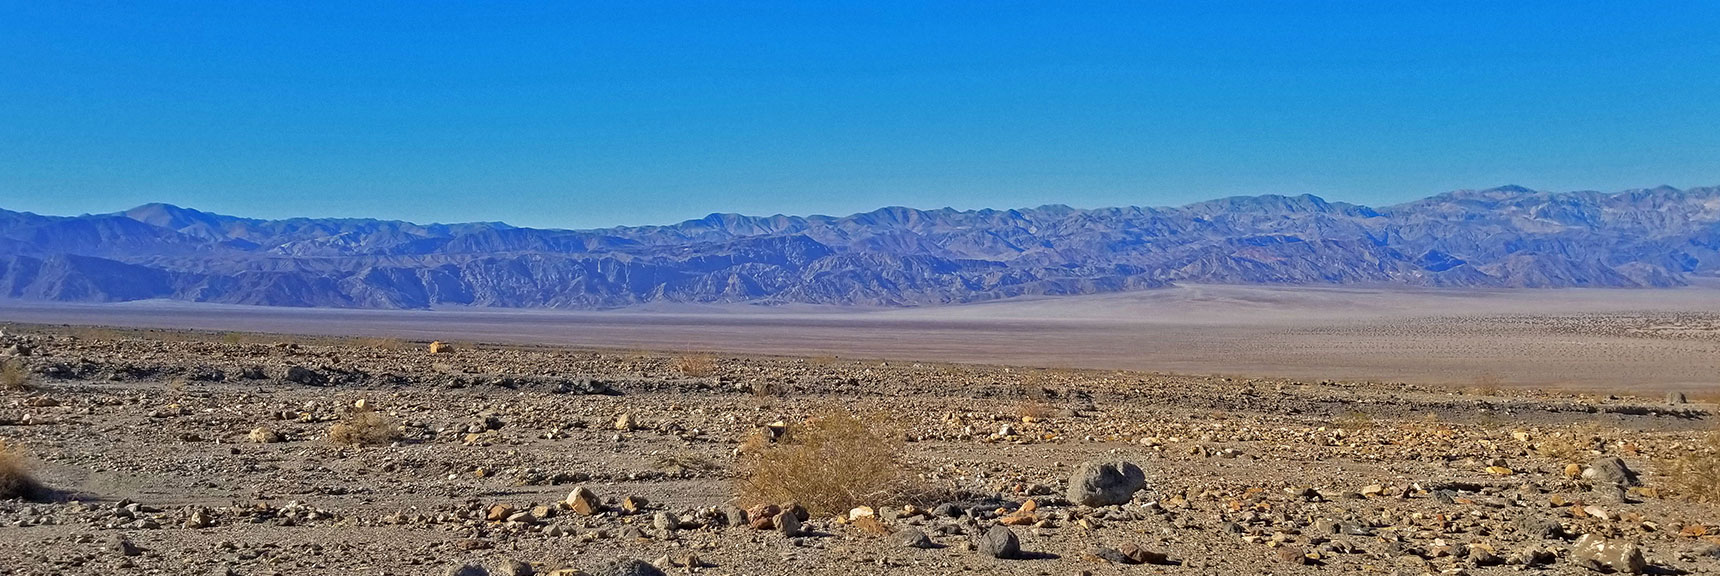 Mountains to the West Across Death Valley | Mosaic Canyon, Above Stovepipe Wells, Death Valley National Park, California